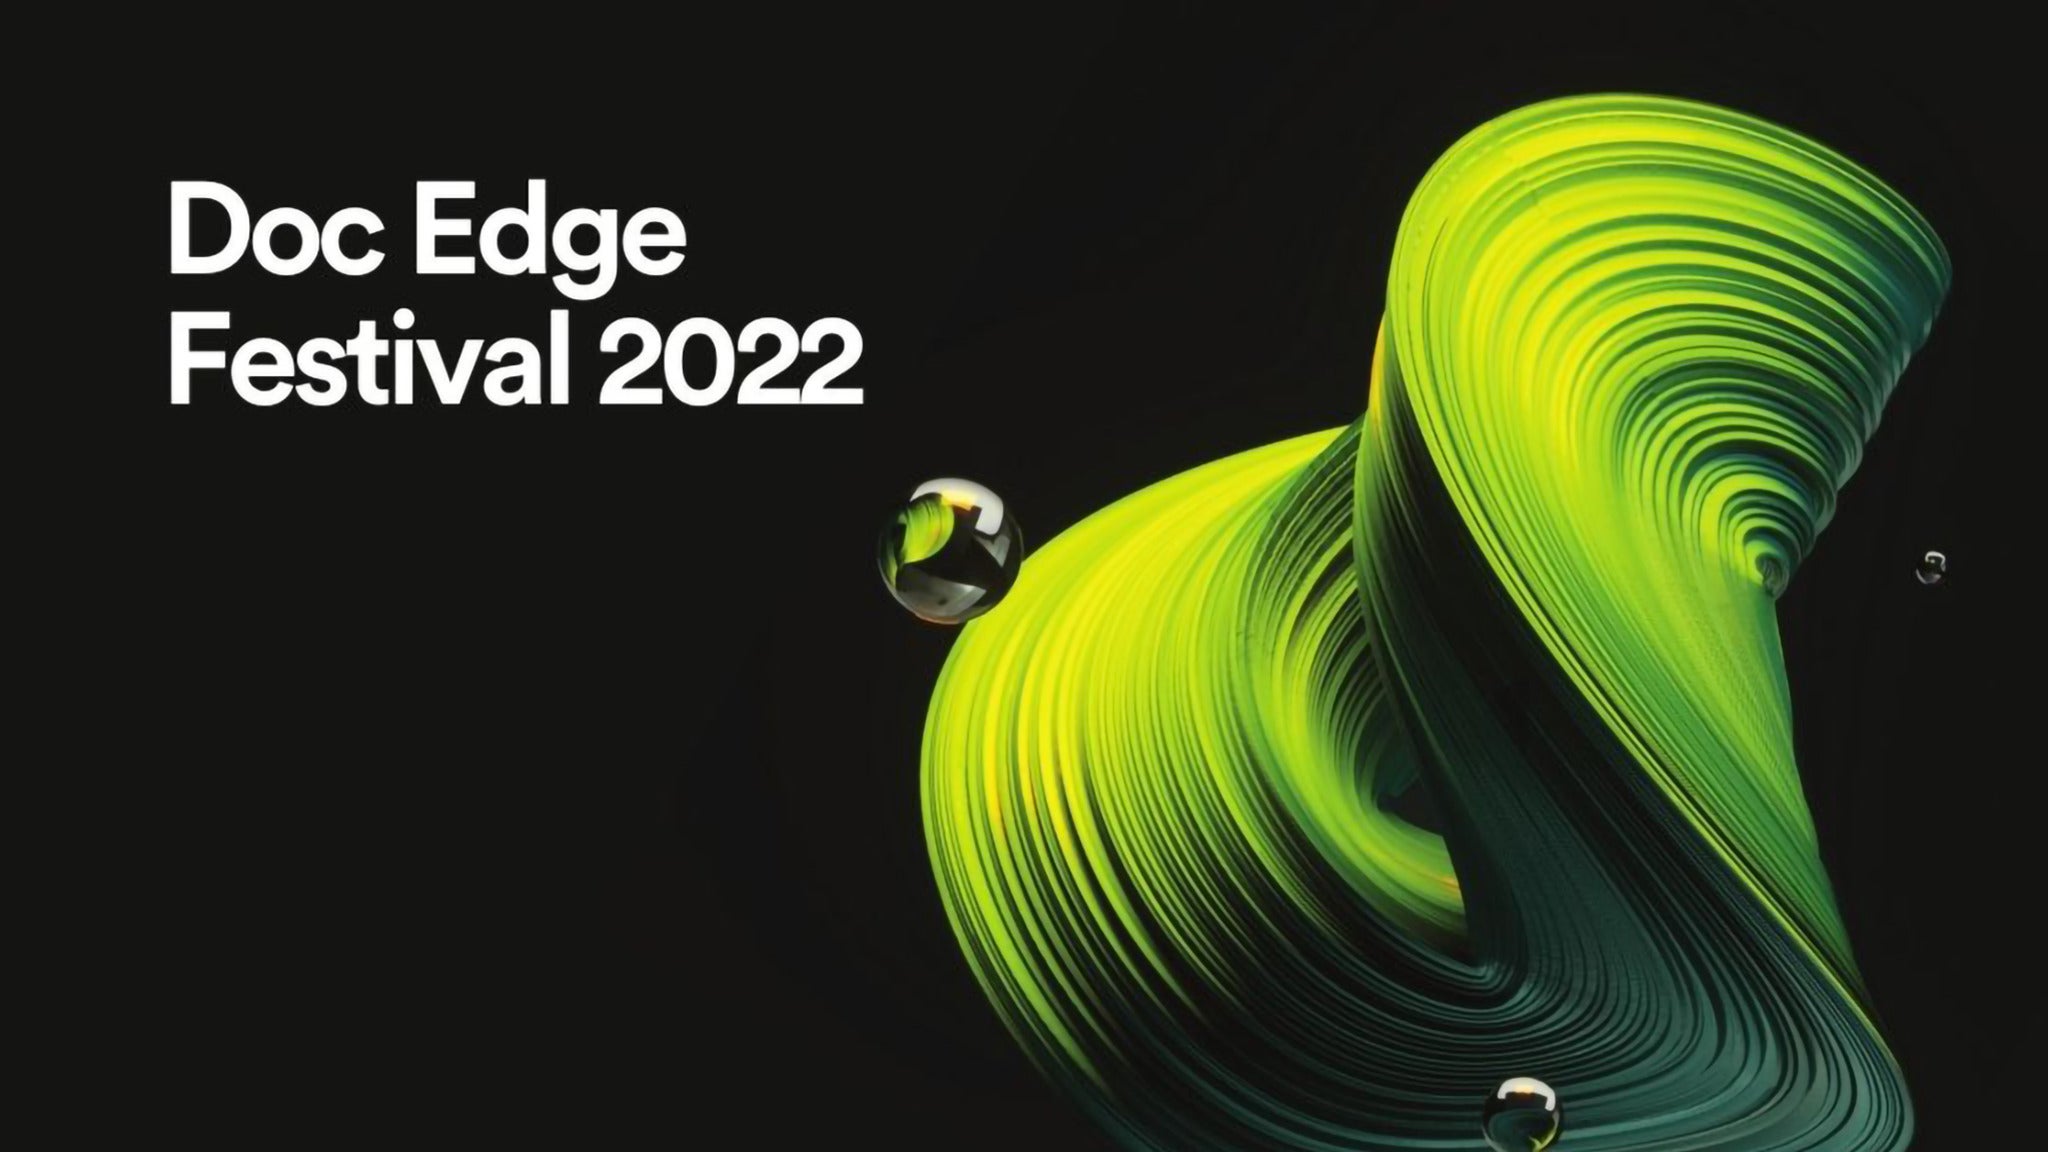 Image used with permission from Ticketmaster | Doc Edge Festival 2022: Ithaka tickets